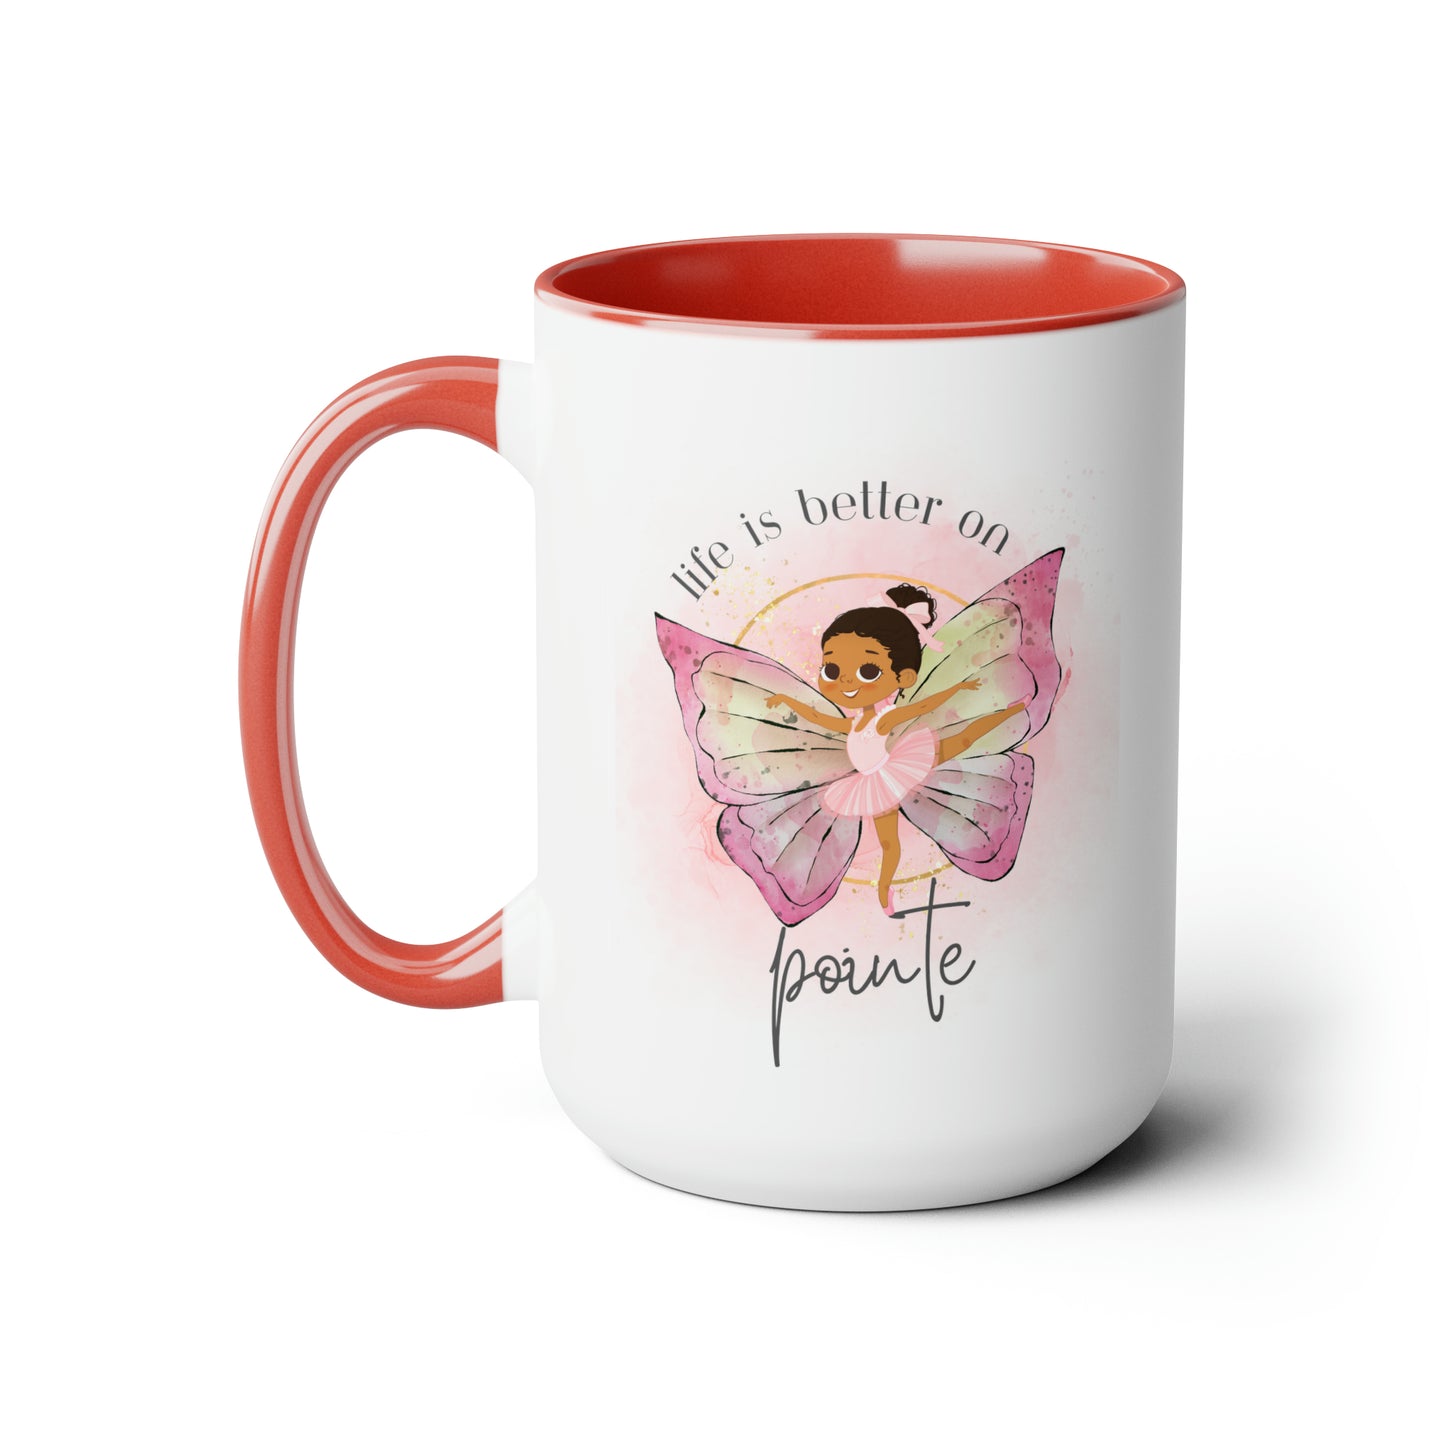 Two-Tone Coffee Mugs - Young Ballerina - Life is better on pointe